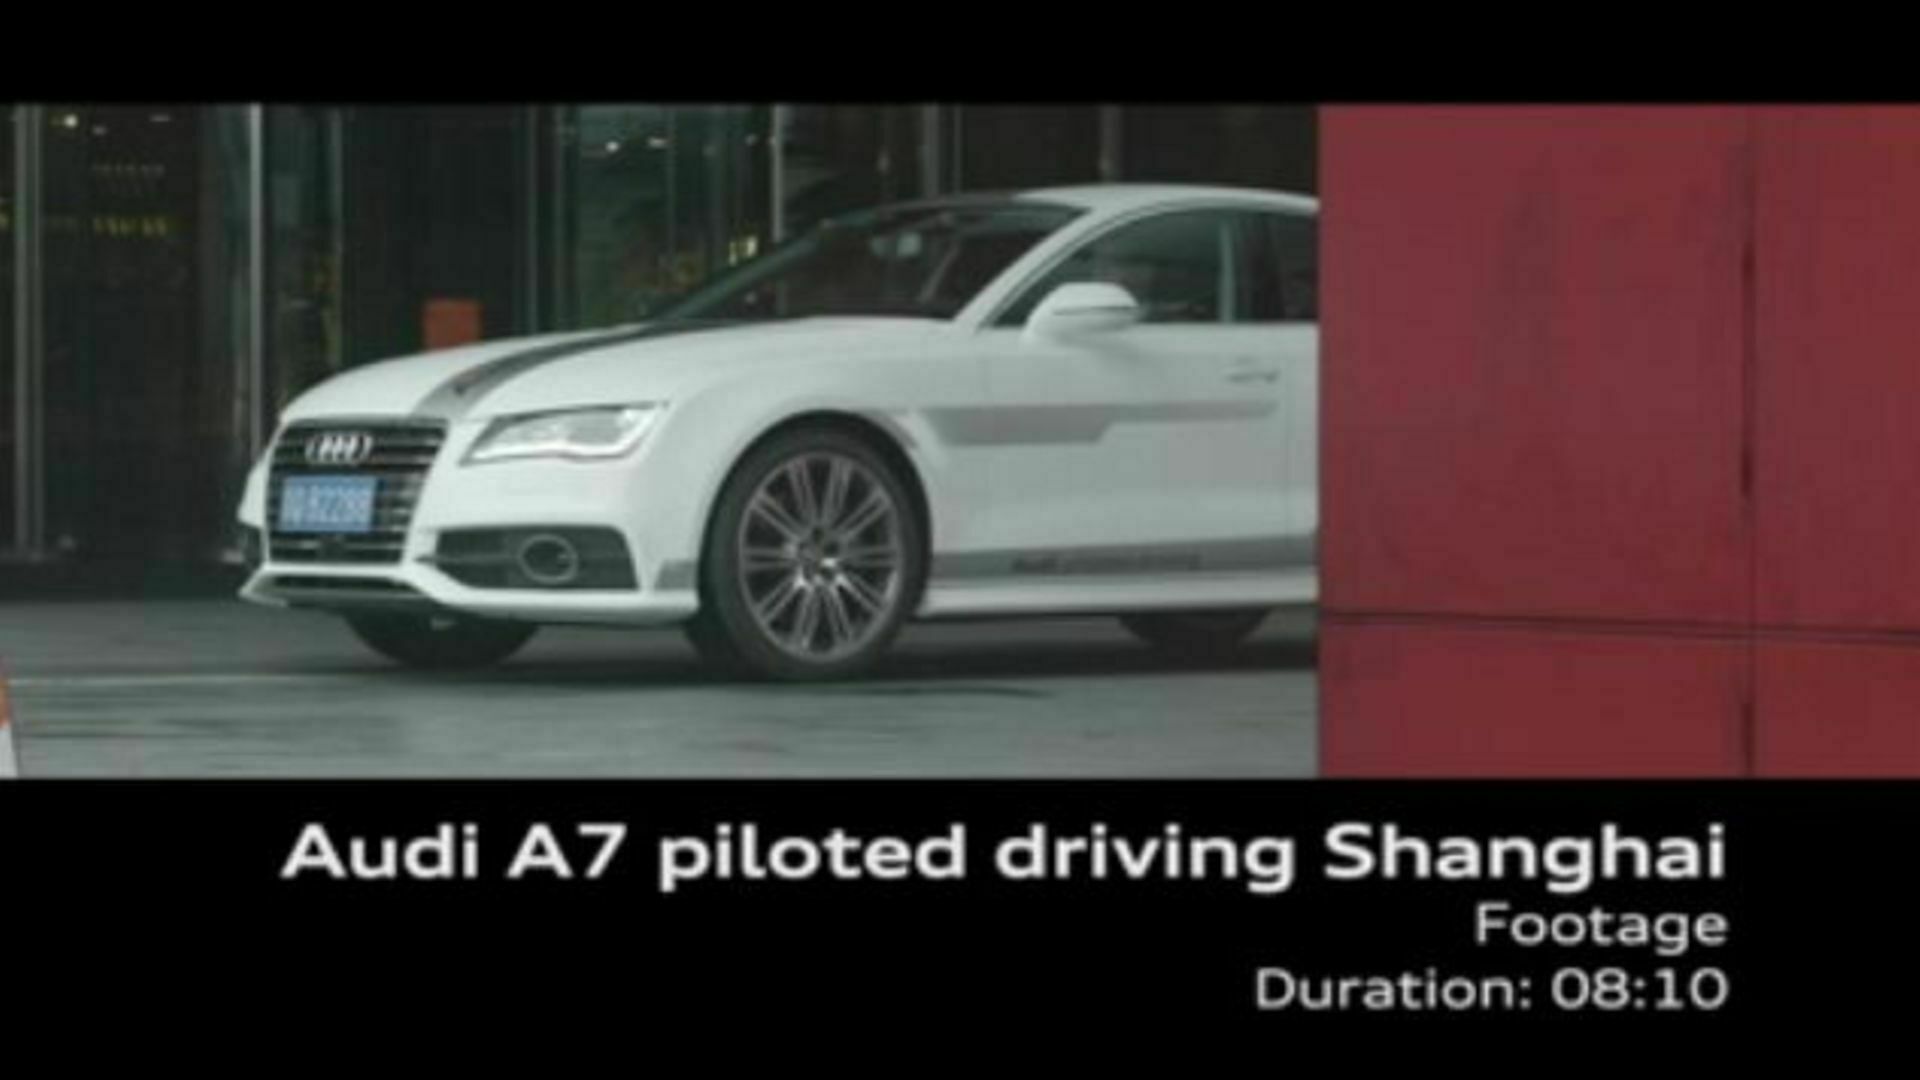 Audi A7 piloted driving Shanghai Footage